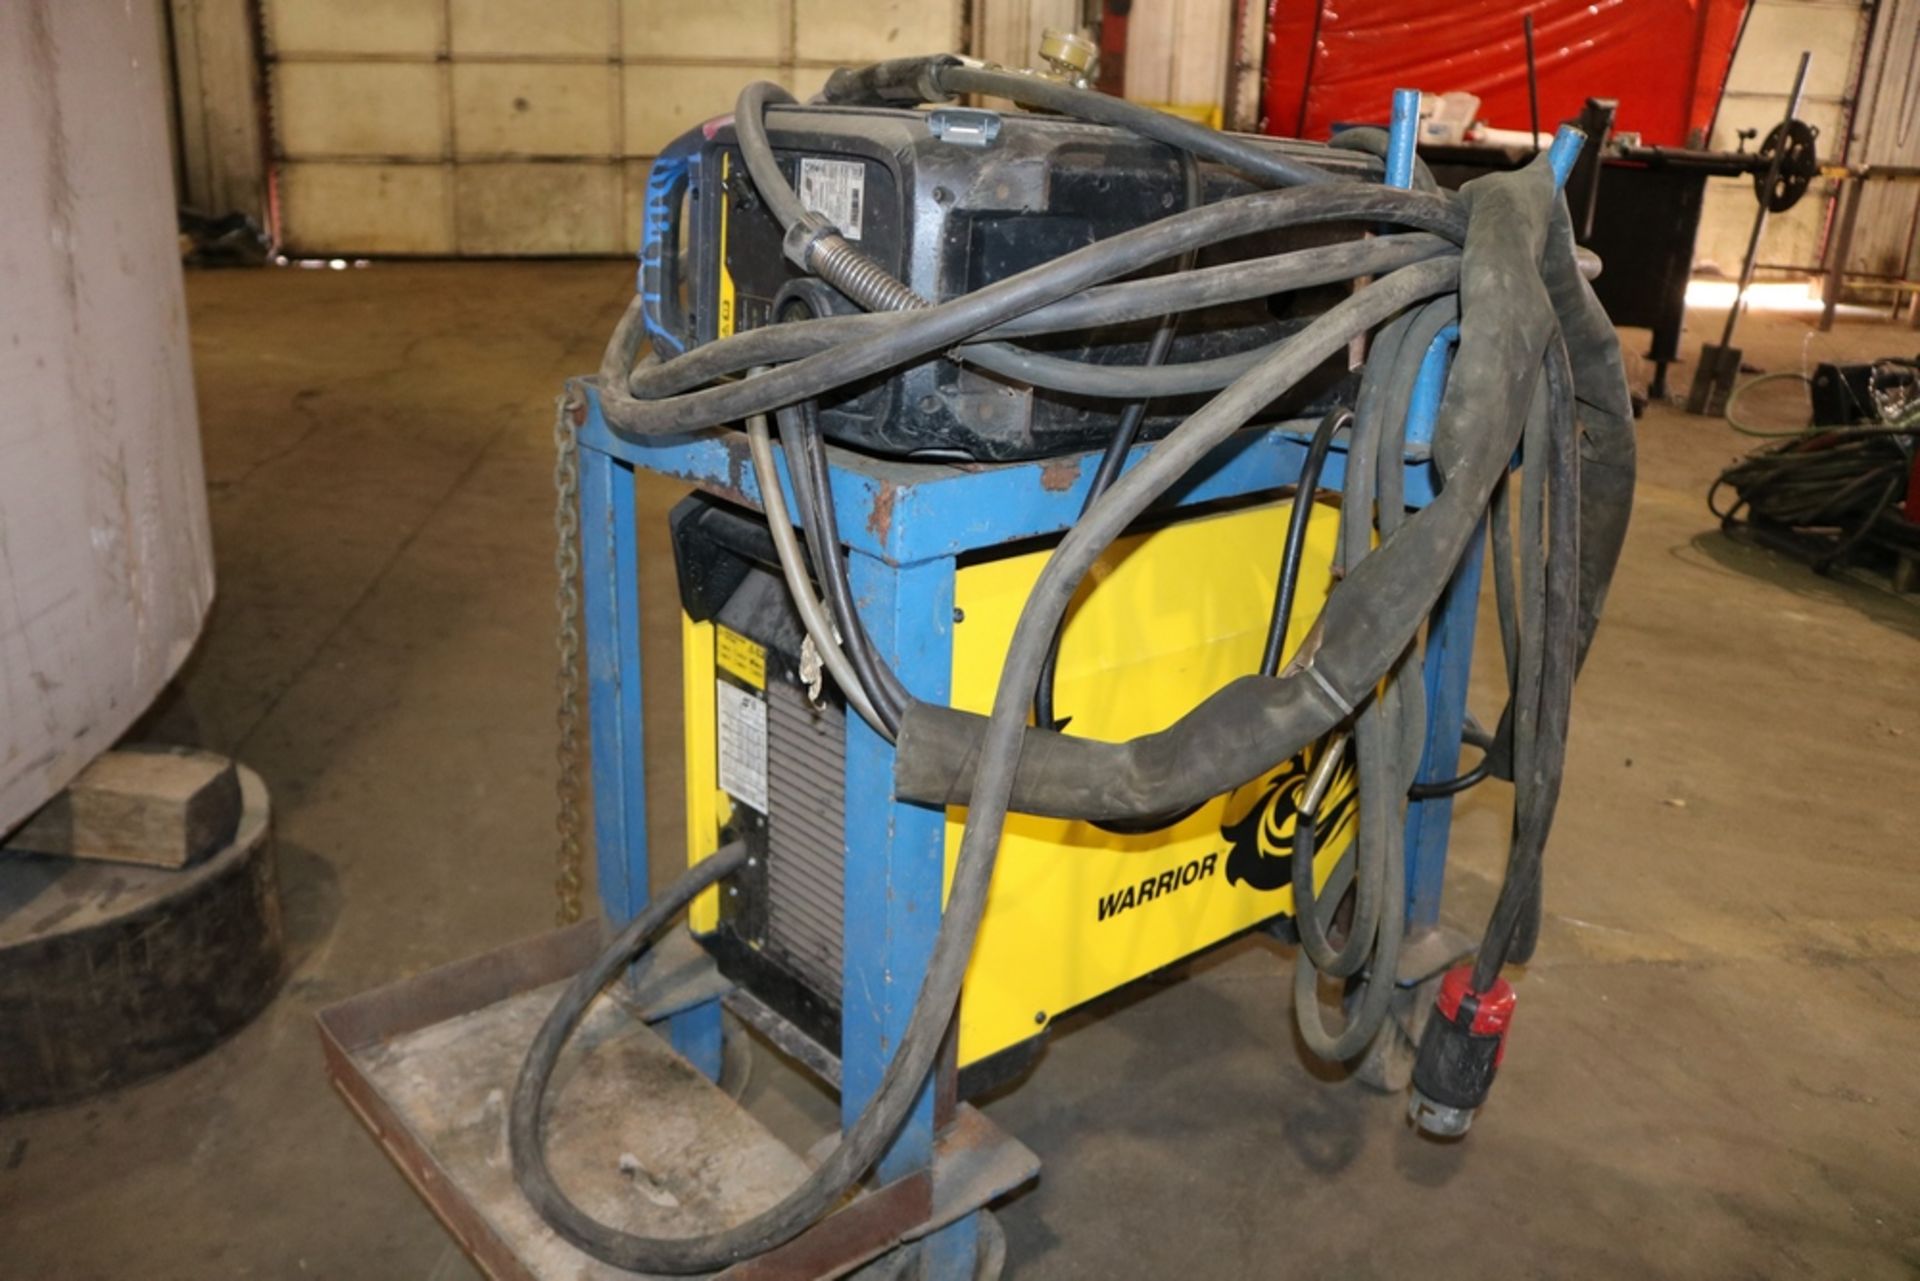 ESAB Warrior 500i Multi Process Welder with Robust Feed Pro Unit - Image 6 of 8